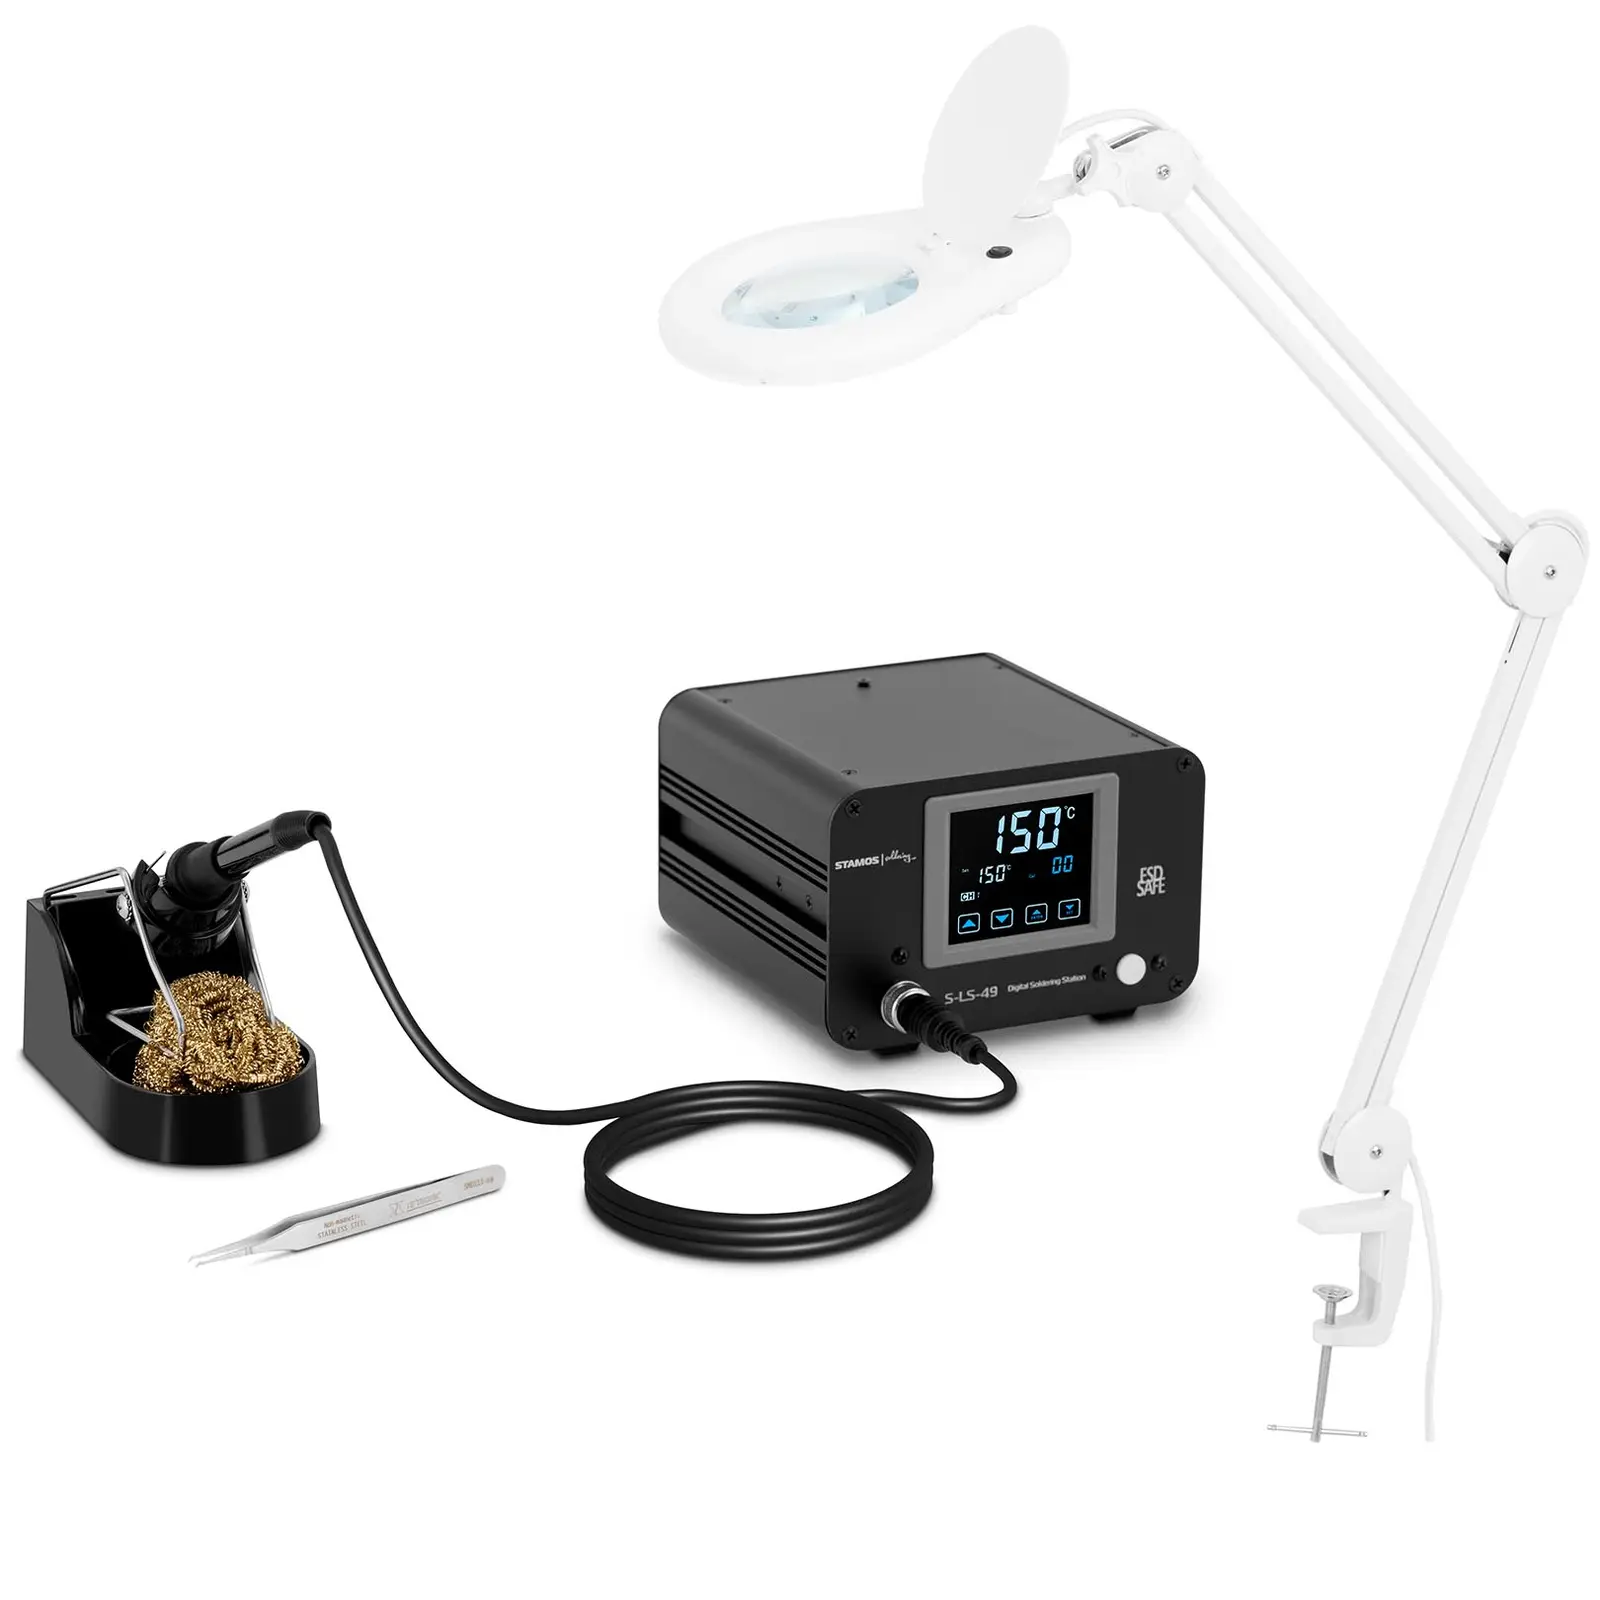 Soldering Station Set with Magnifying Lamp - digital - 100 W - LCD touch